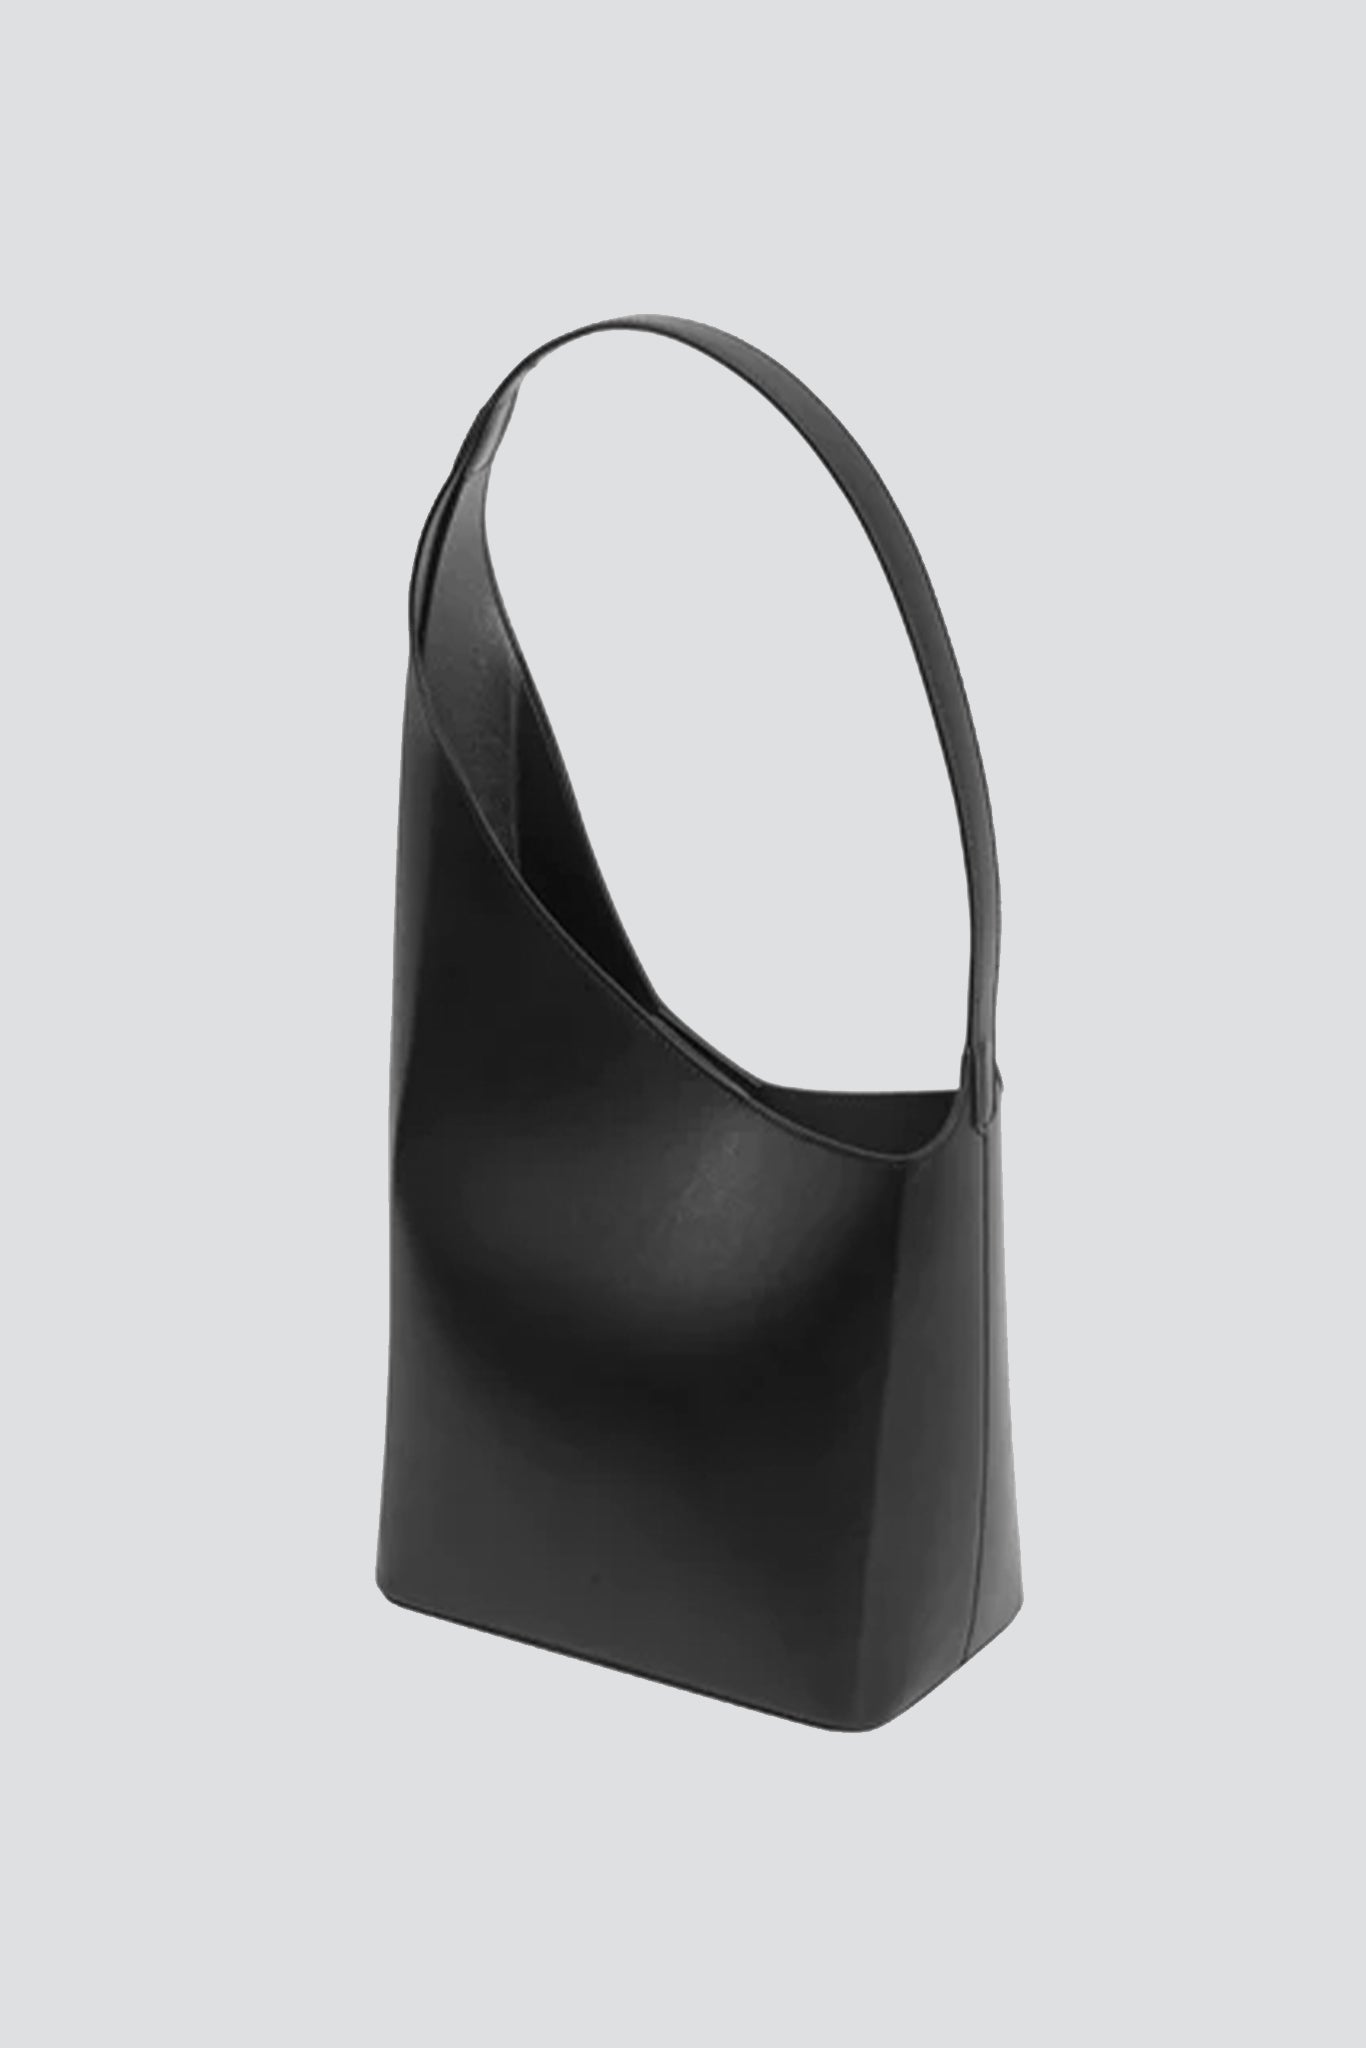 Aesther Ekme Lune Leather Tote Bag - Black